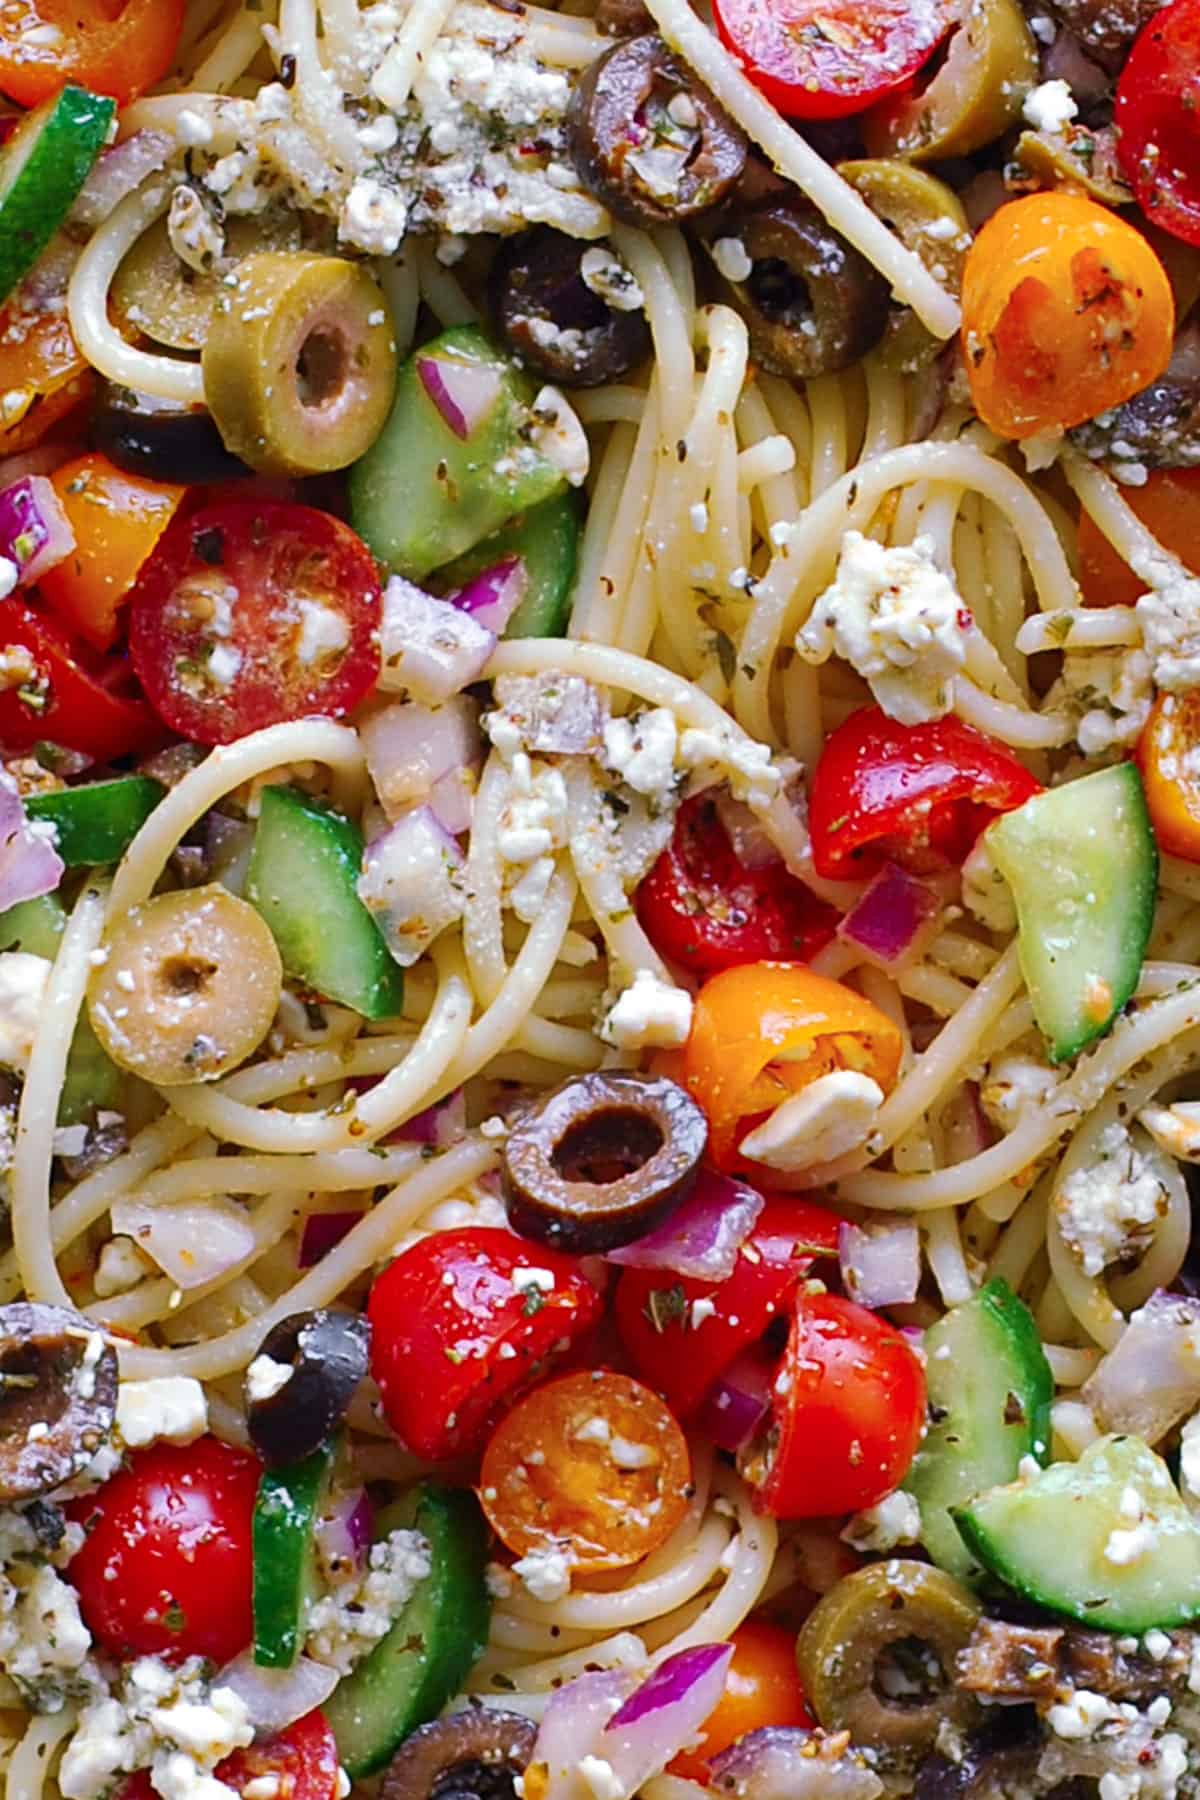 Spaghetti Salad with cherry (or grape) tomatoes, cucumbers, black olives, green olives, red onion, and feta cheese - close-up photo.